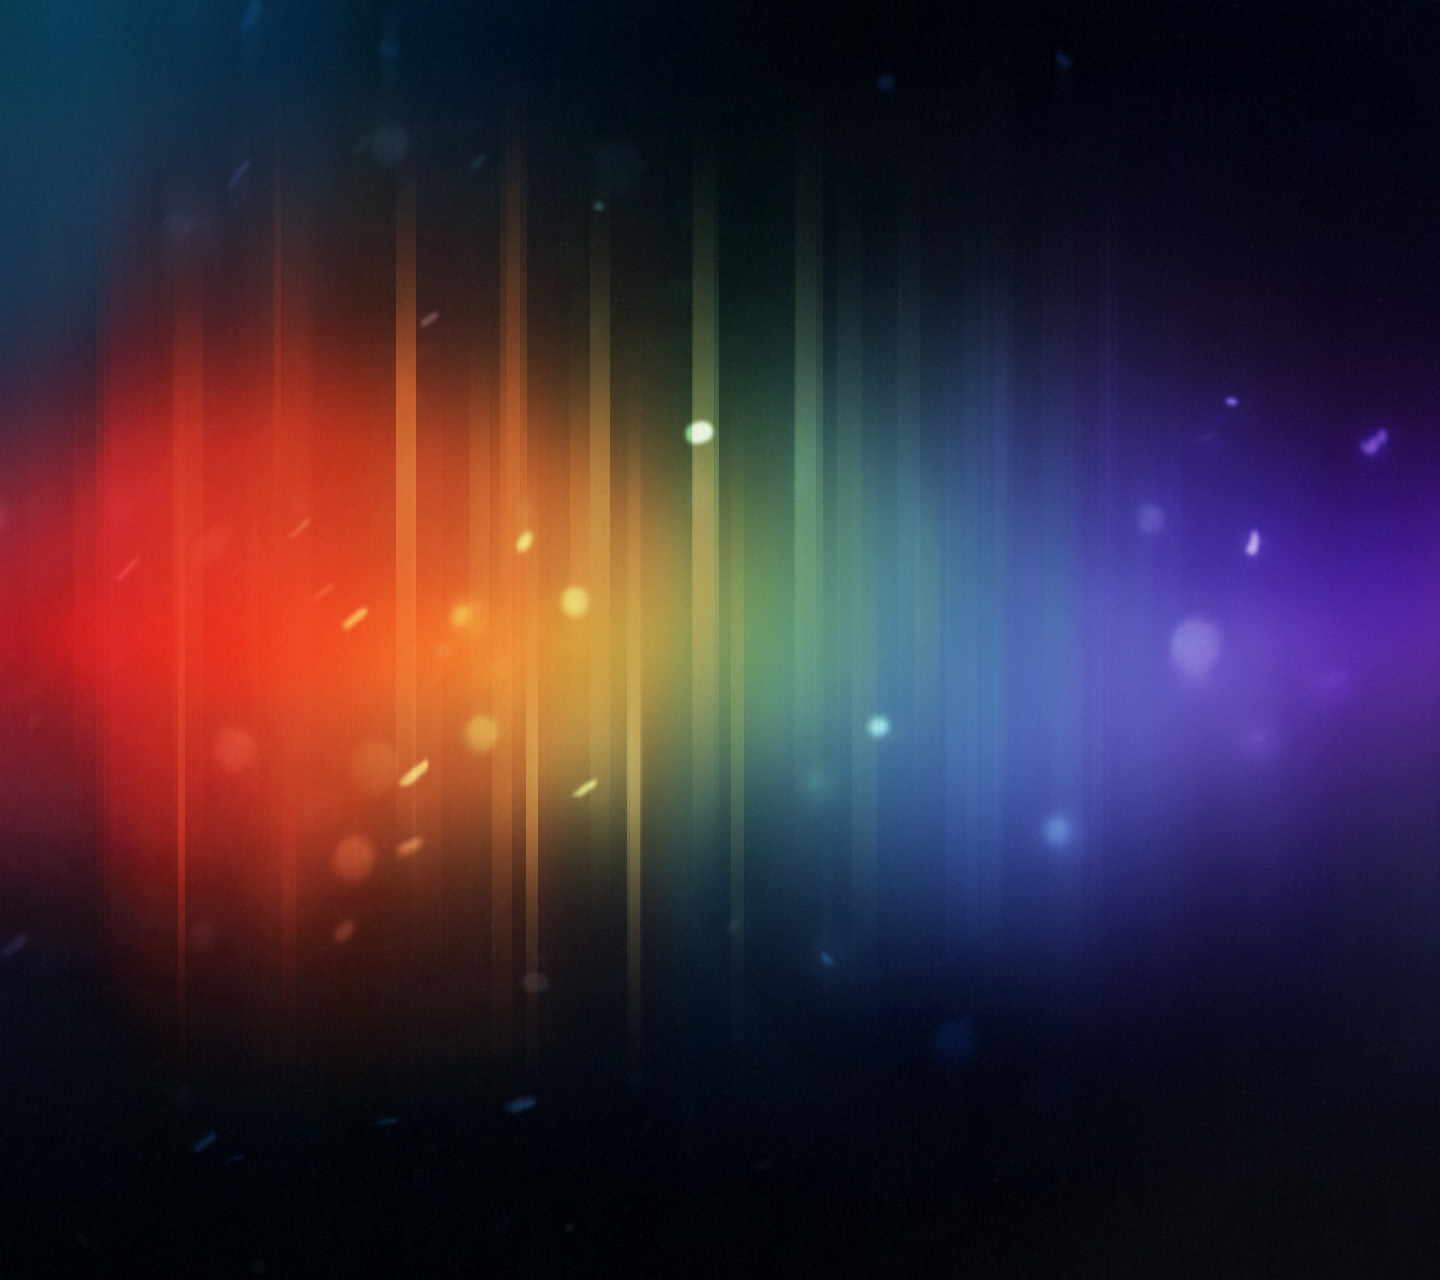 Android Jelly Bean Wallpaper